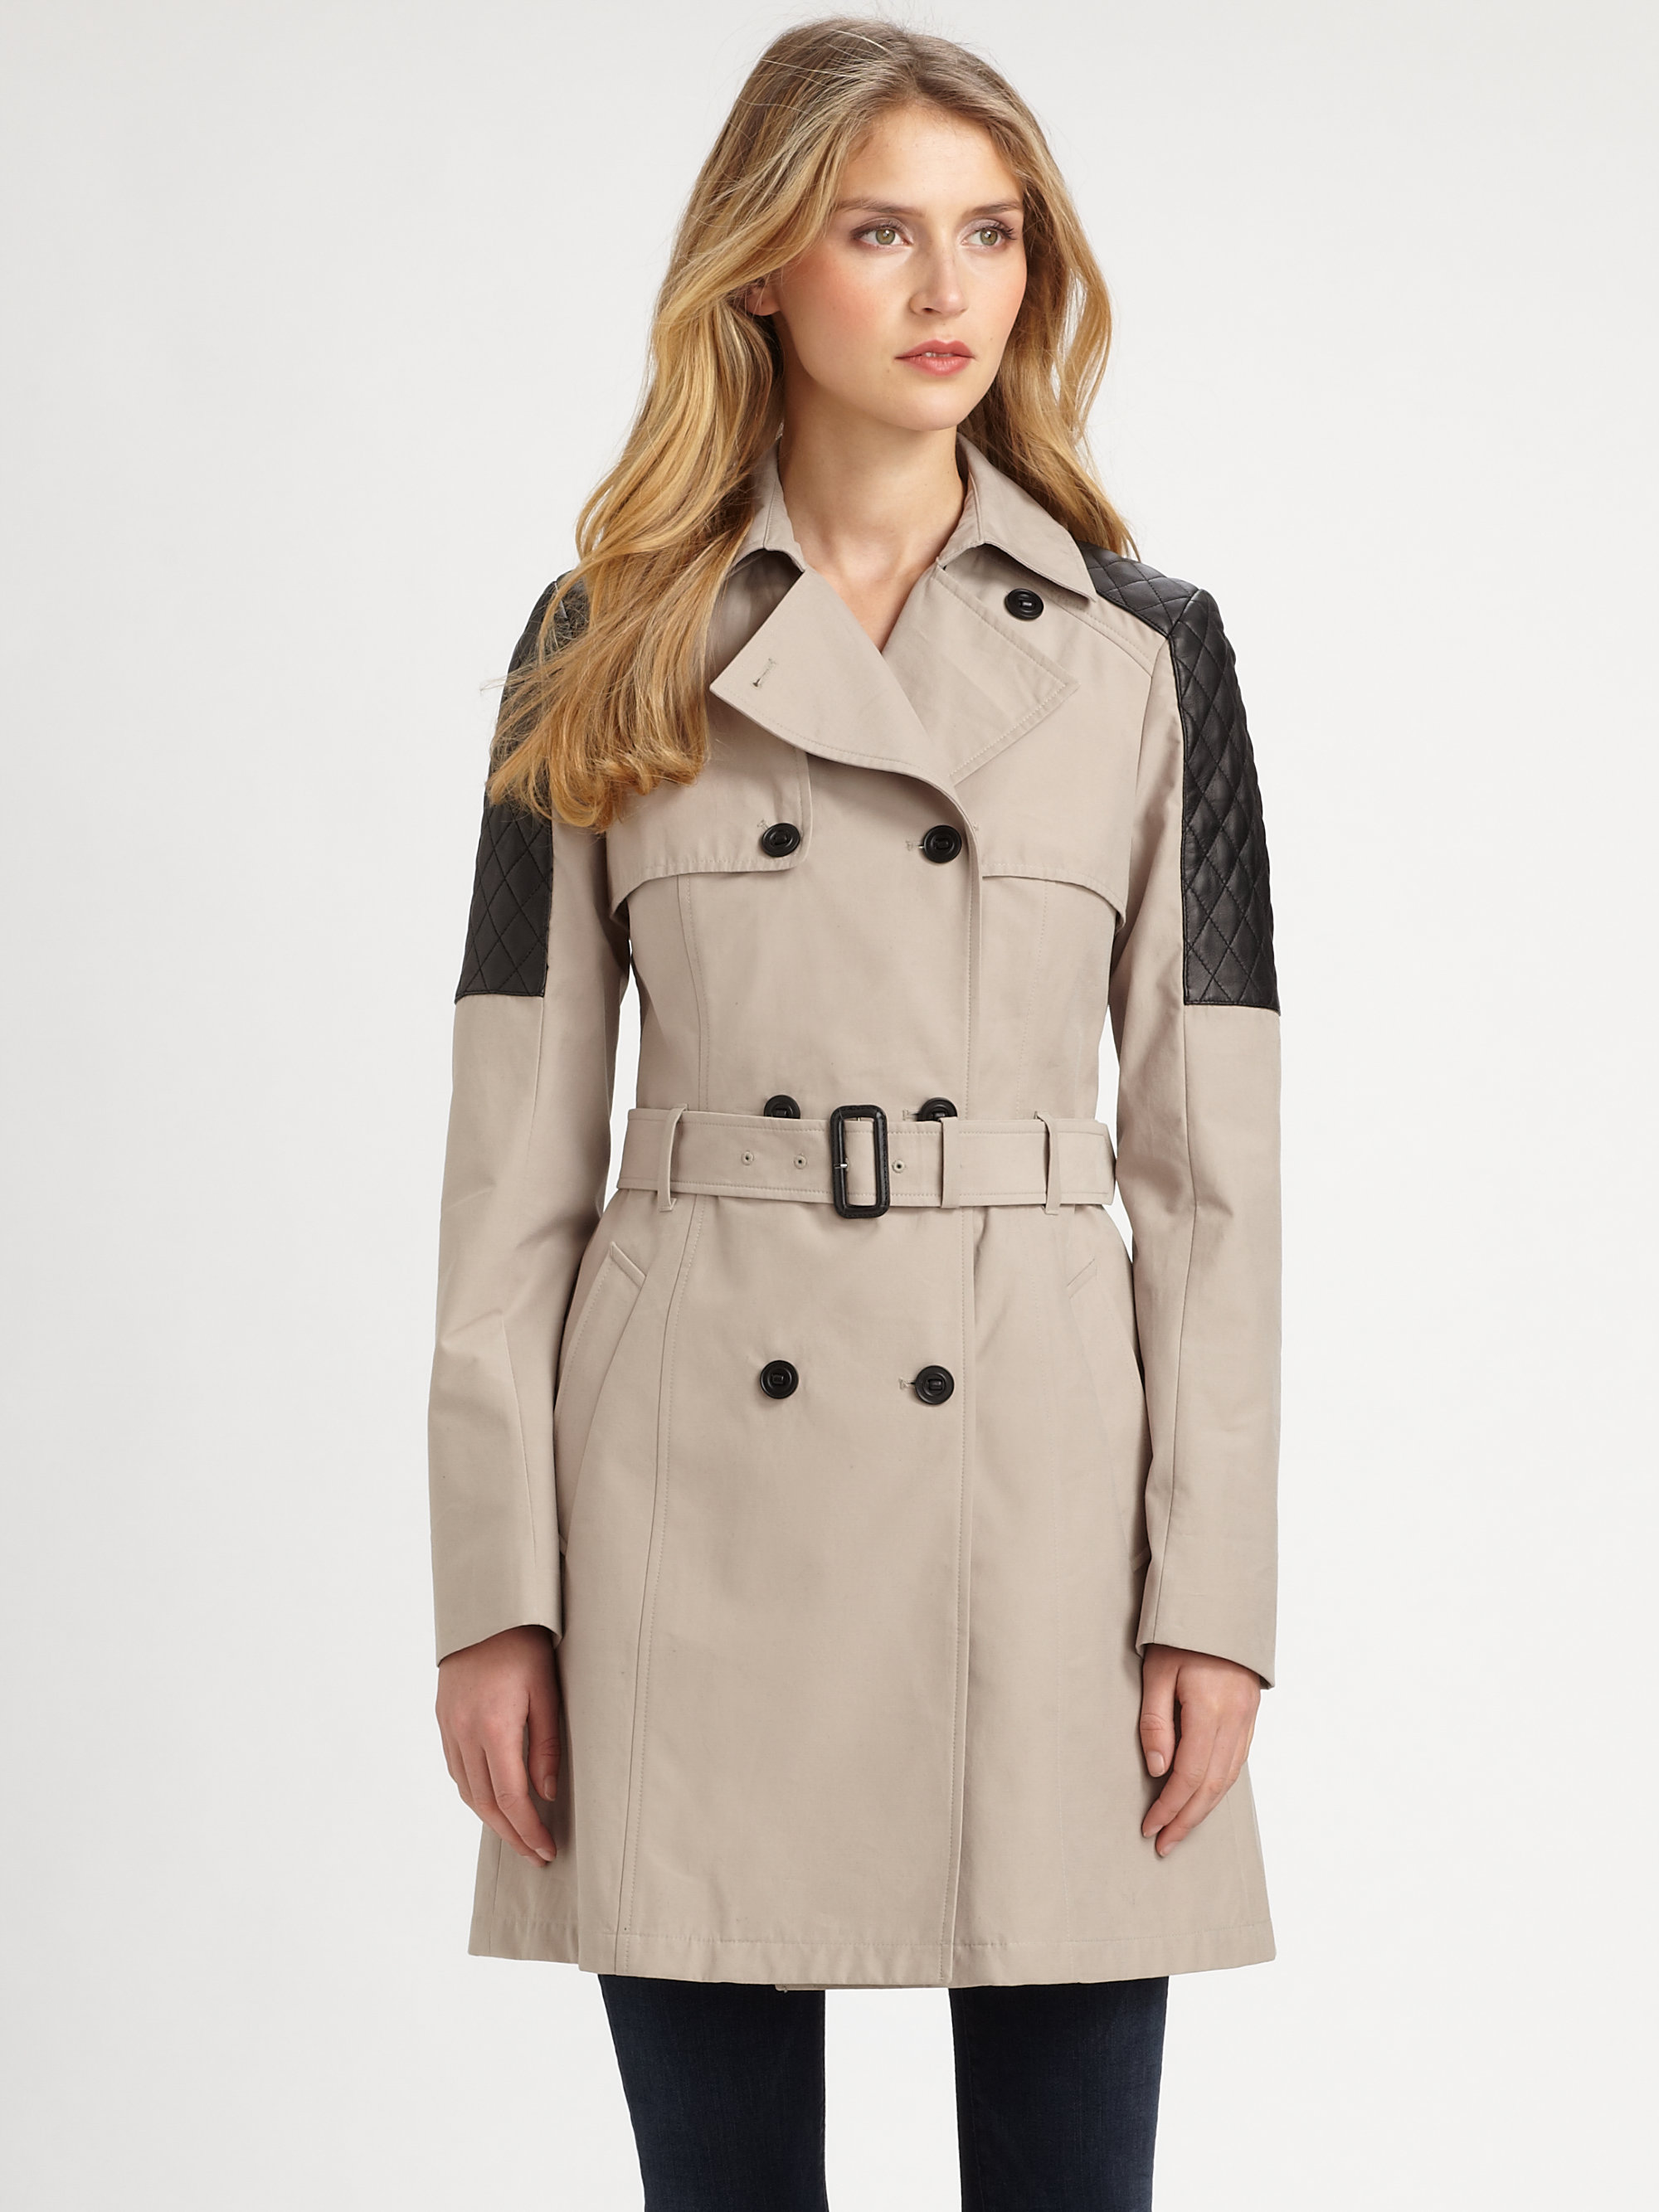 Lyst - Mackage Lilith Leathertrim Trench Coat in Natural